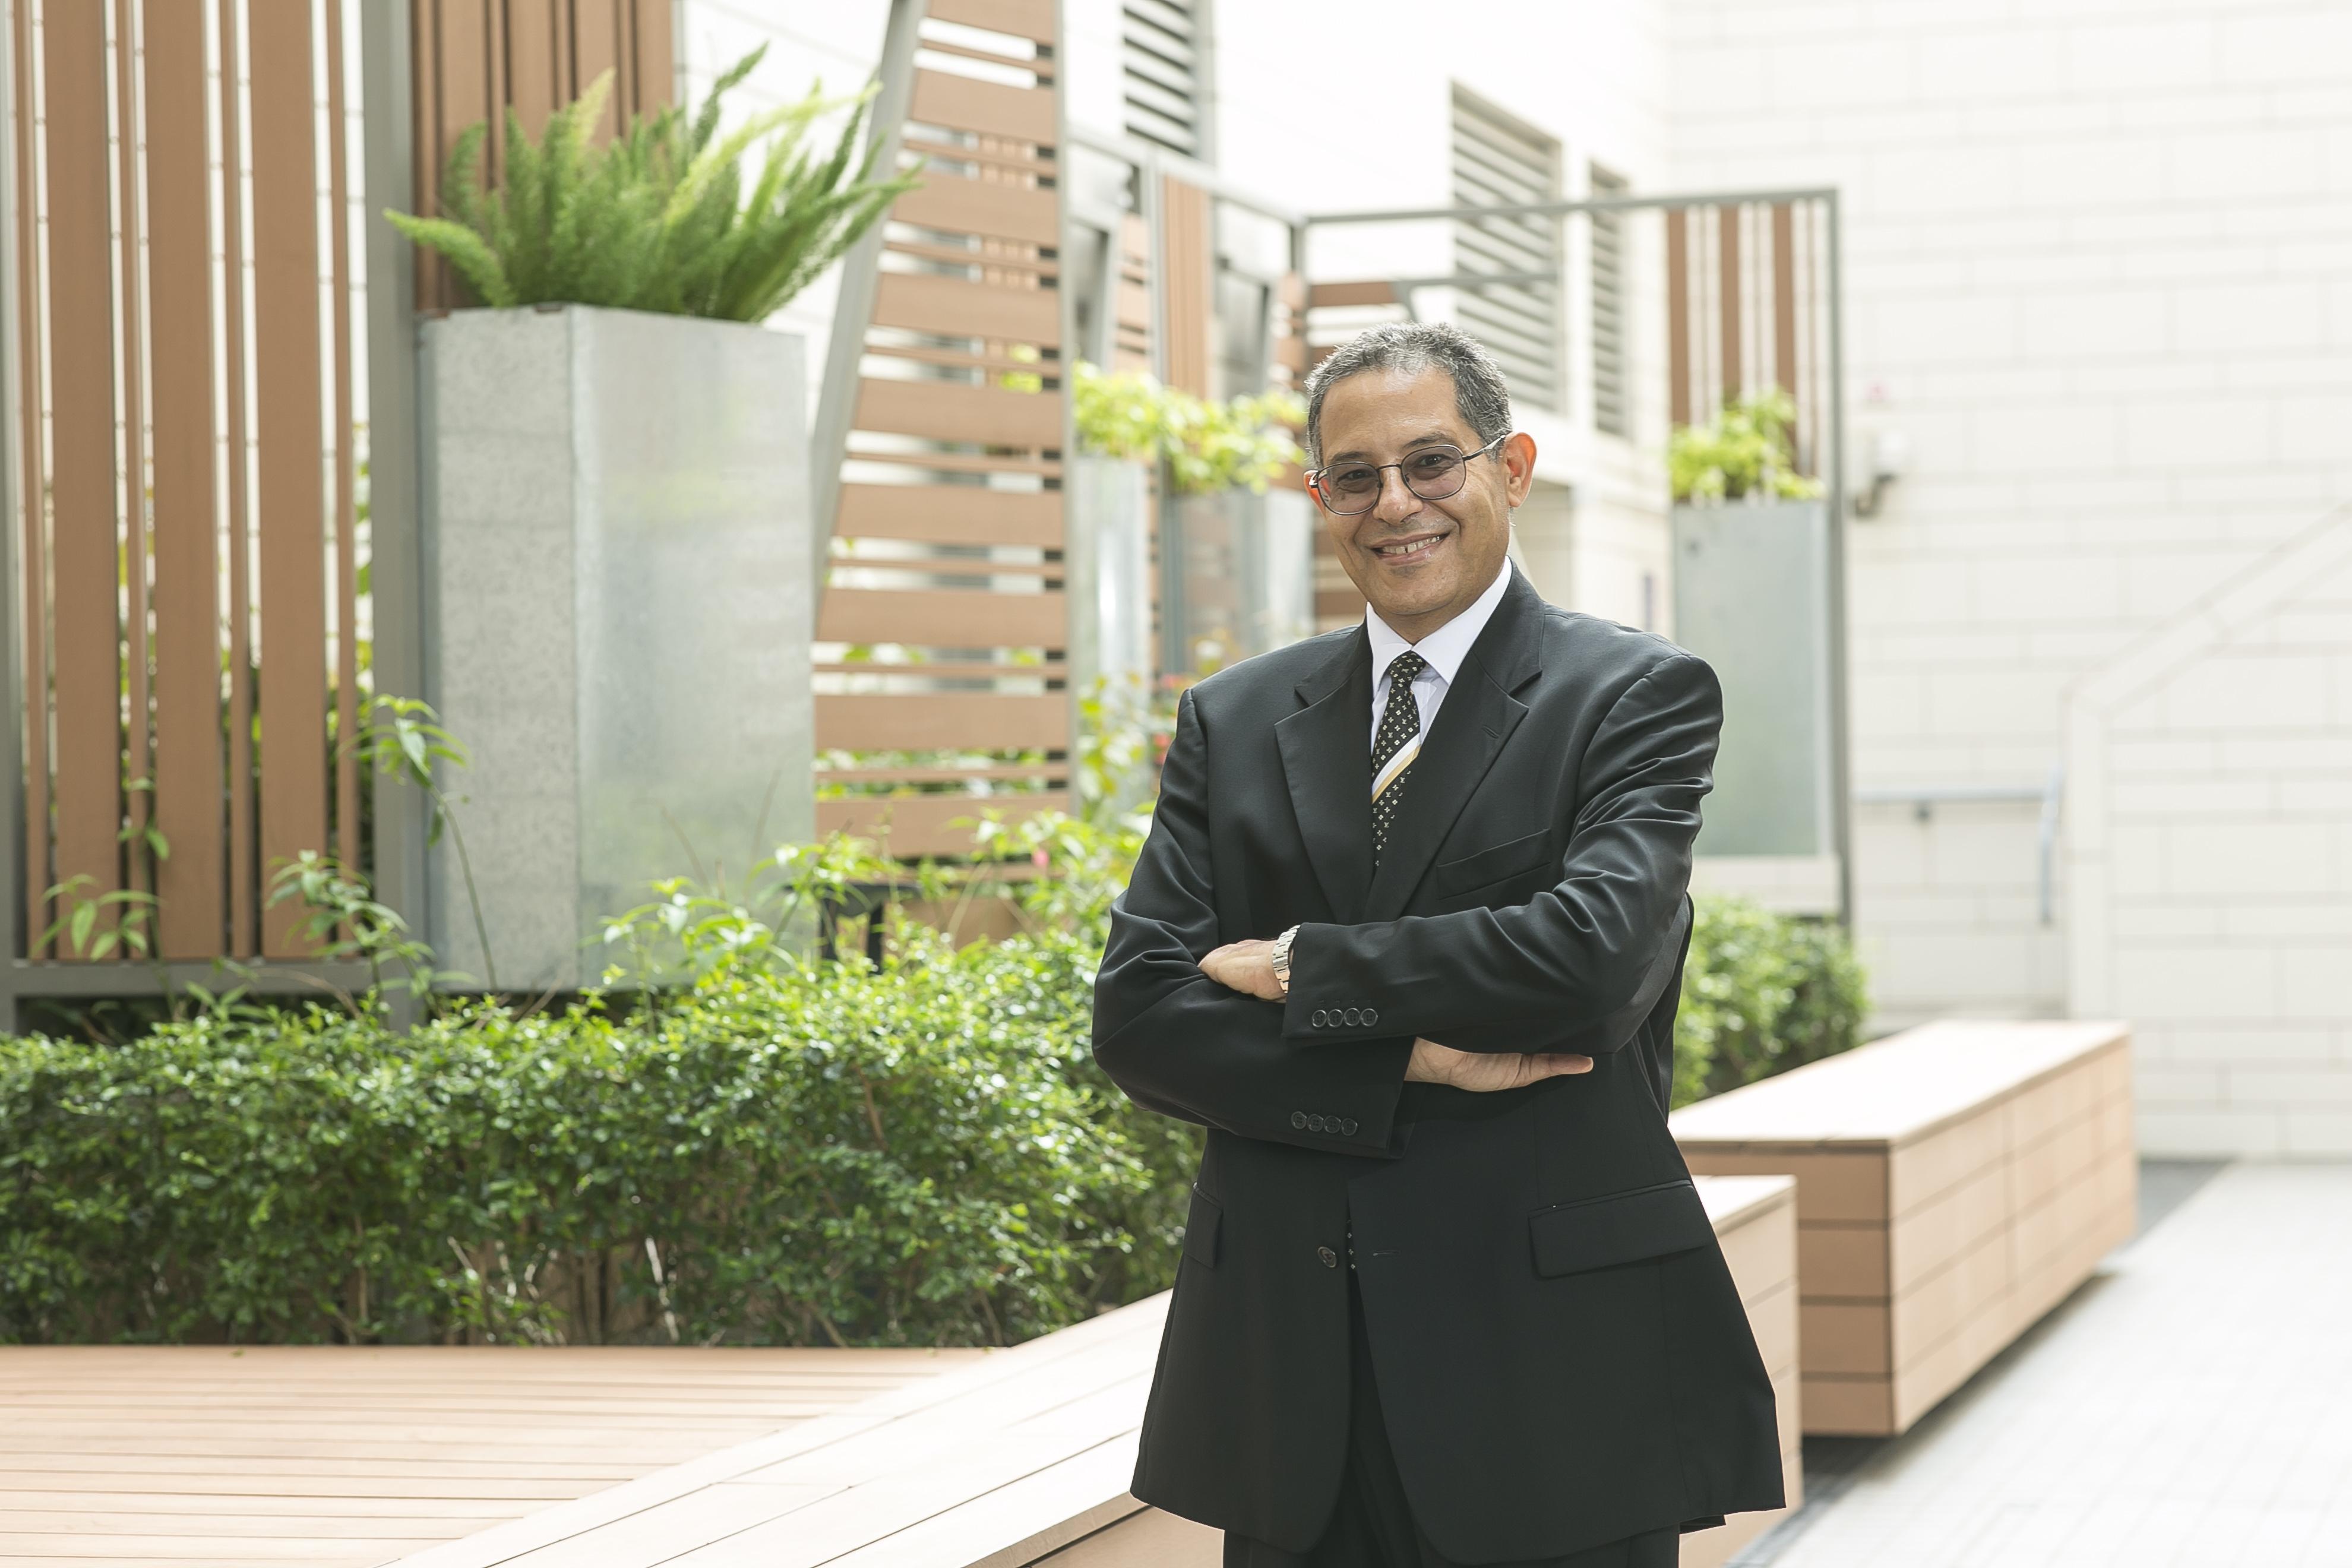 Prof. Khaled B. Letaief has recently added one more prestigious title – Fellow of the Indian National Academy of Engineering – to his long list of international honors in his distinguished career.